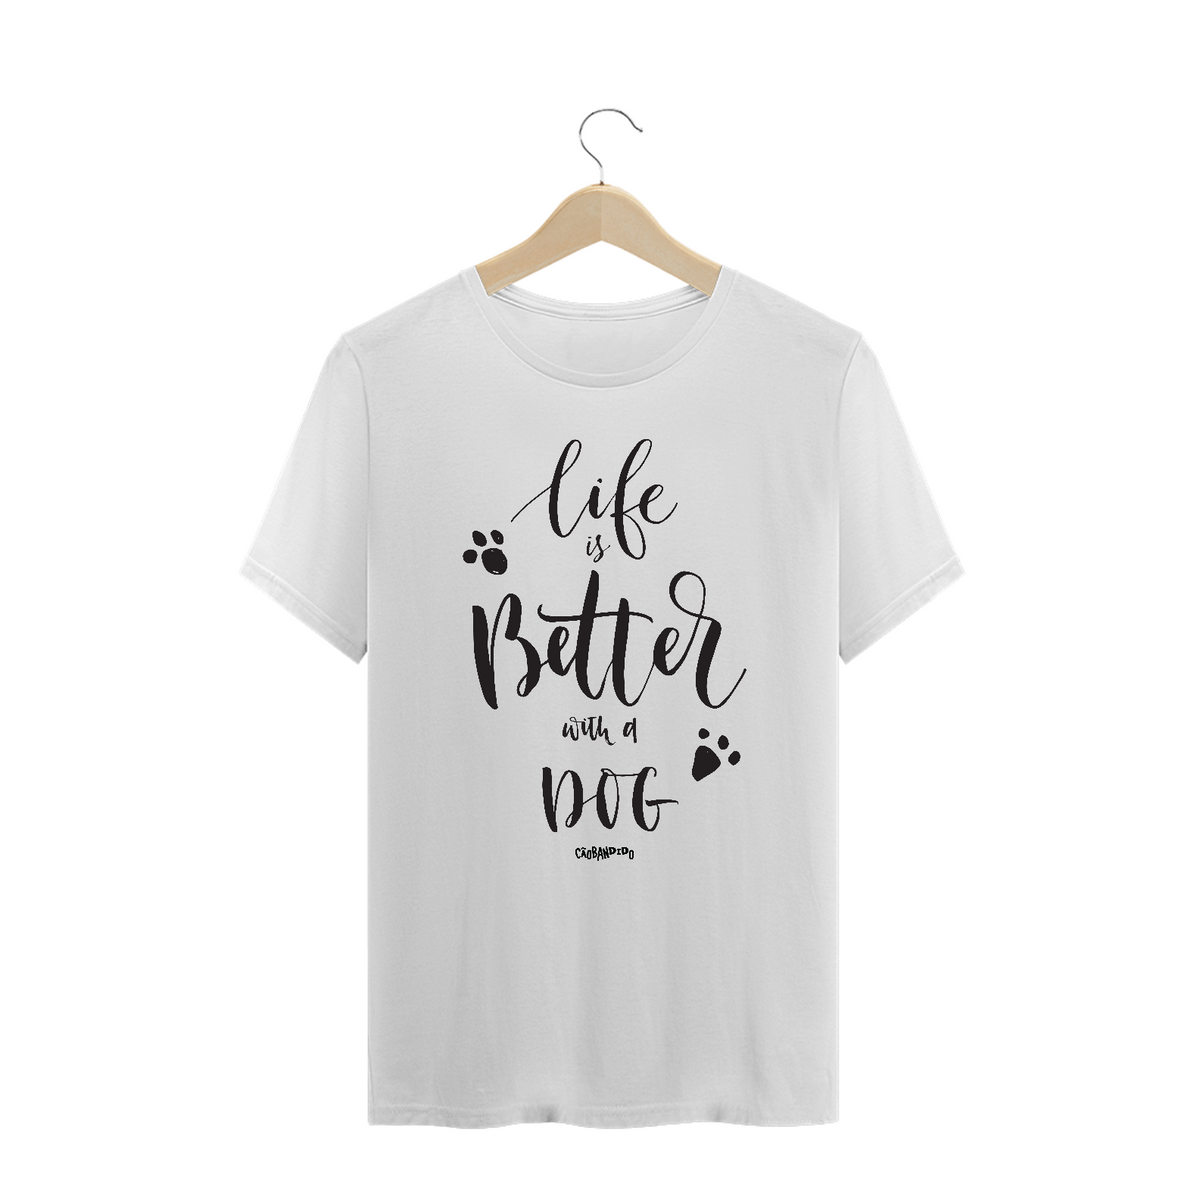 Nome do produto: Camiseta Plus Size Life is Better With a Dog